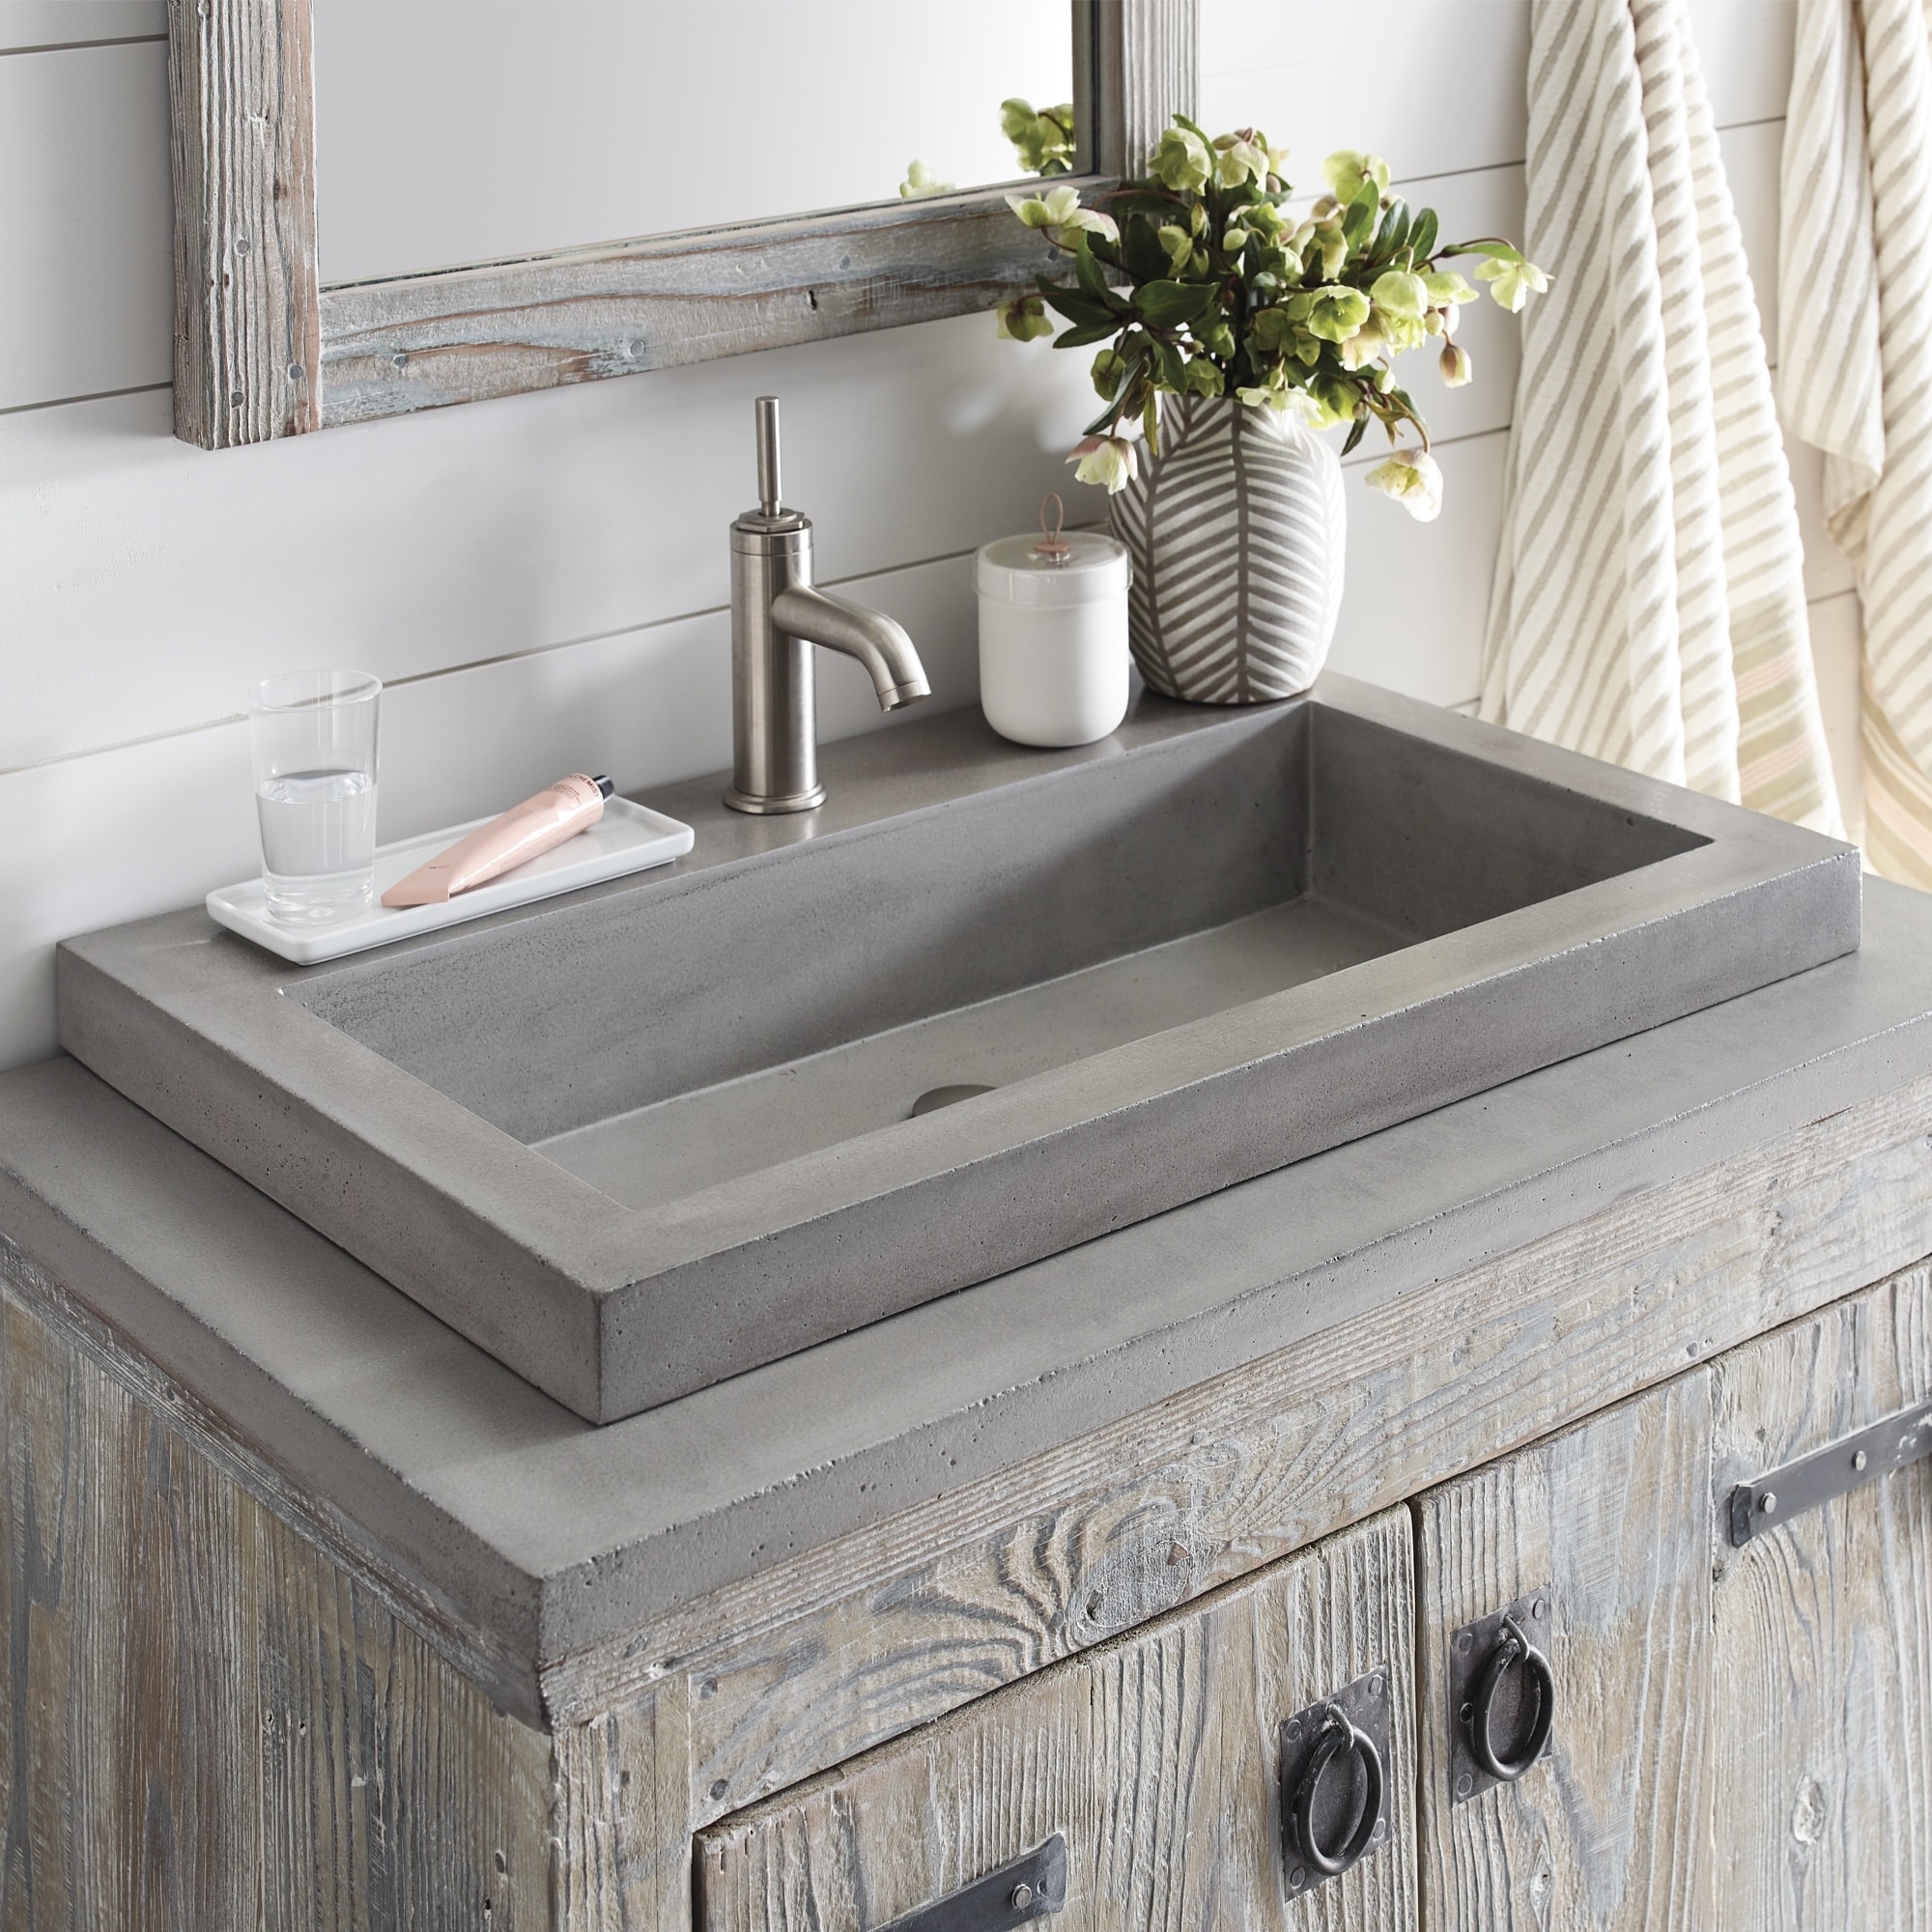 36" NativeStone Vanity Top - Trough 3019 Sink Cutout (Top Only) - Bed Bath & Beyond - 31573213